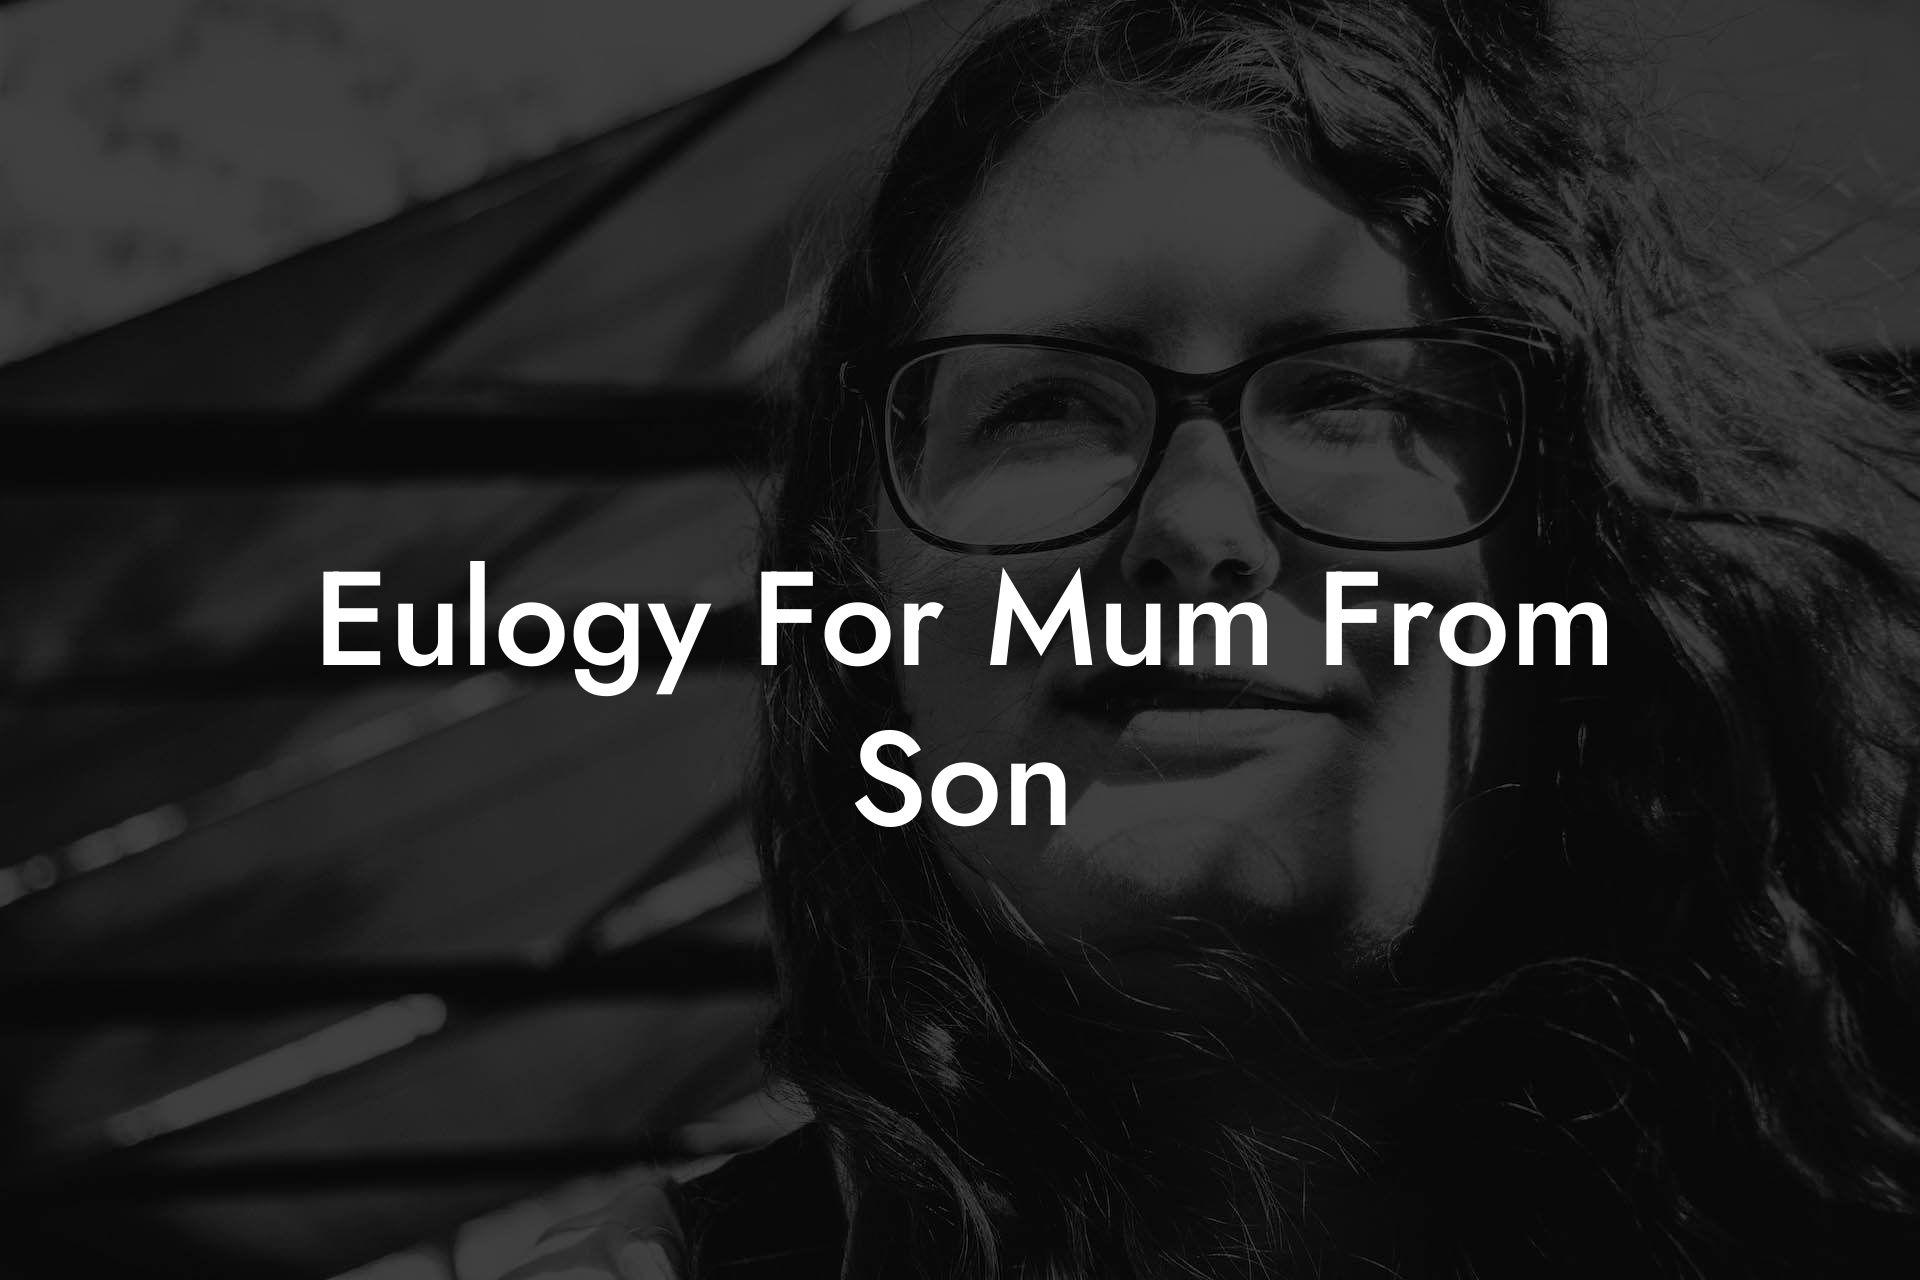 Eulogy For Mum From Son